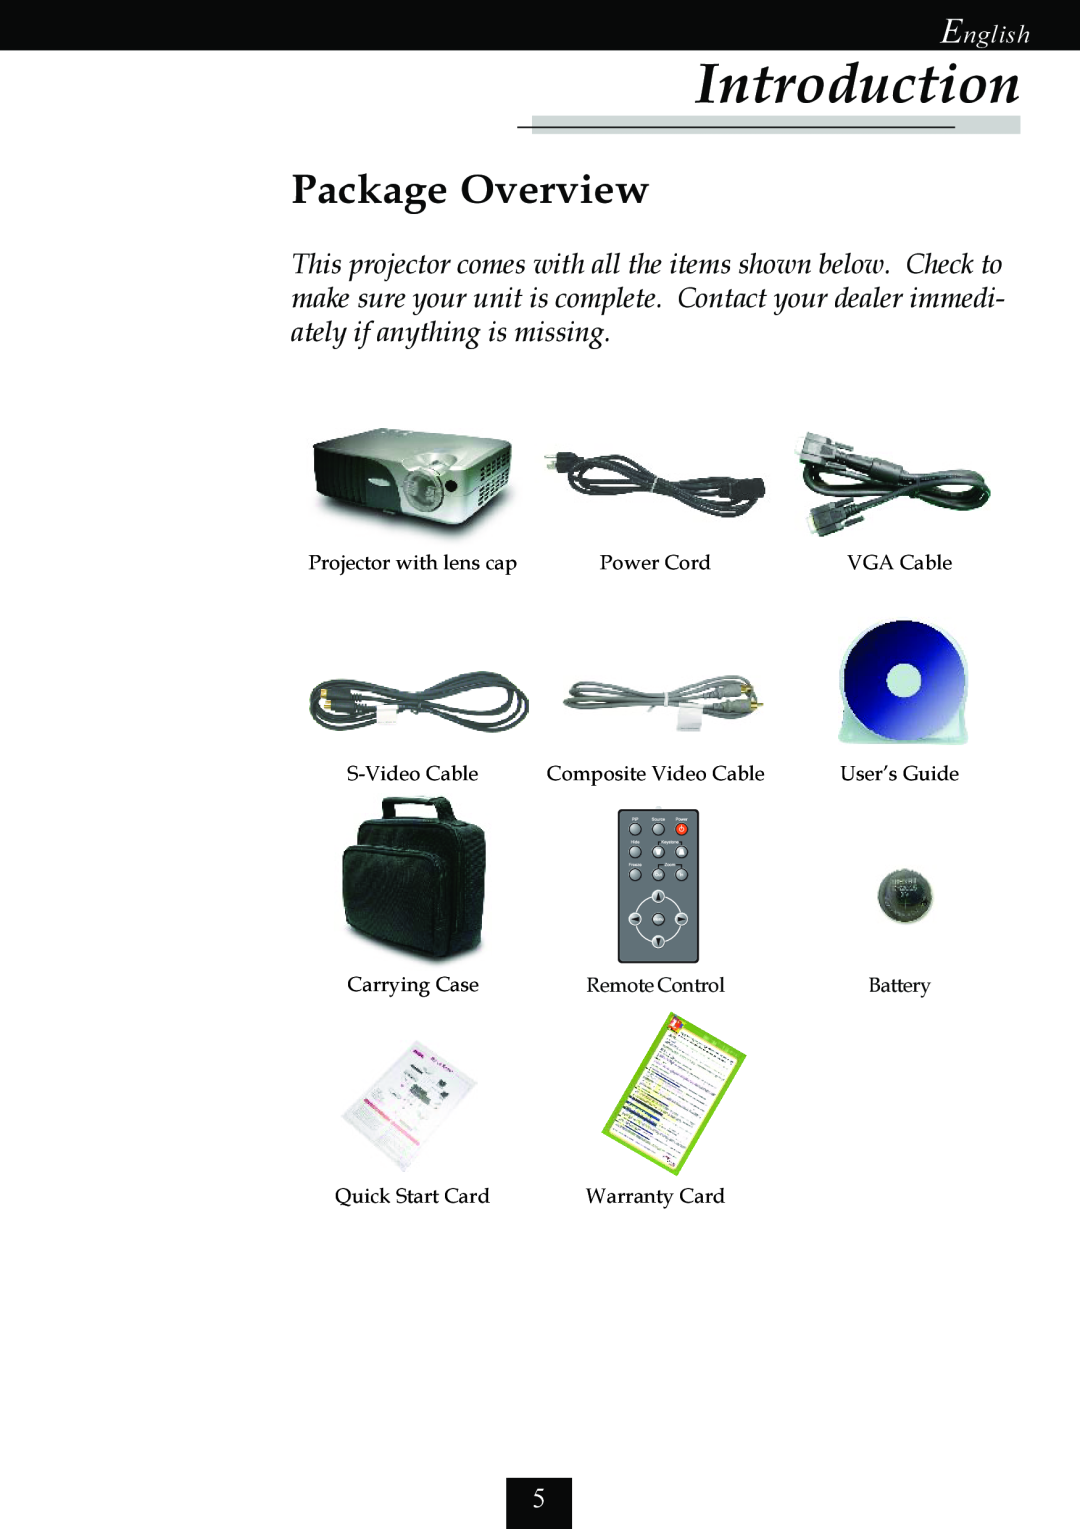 Optoma Technology EP725 Package Overview, Introduction, English, Projector with lens cap, Power Cord, VGA Cable, Battery 